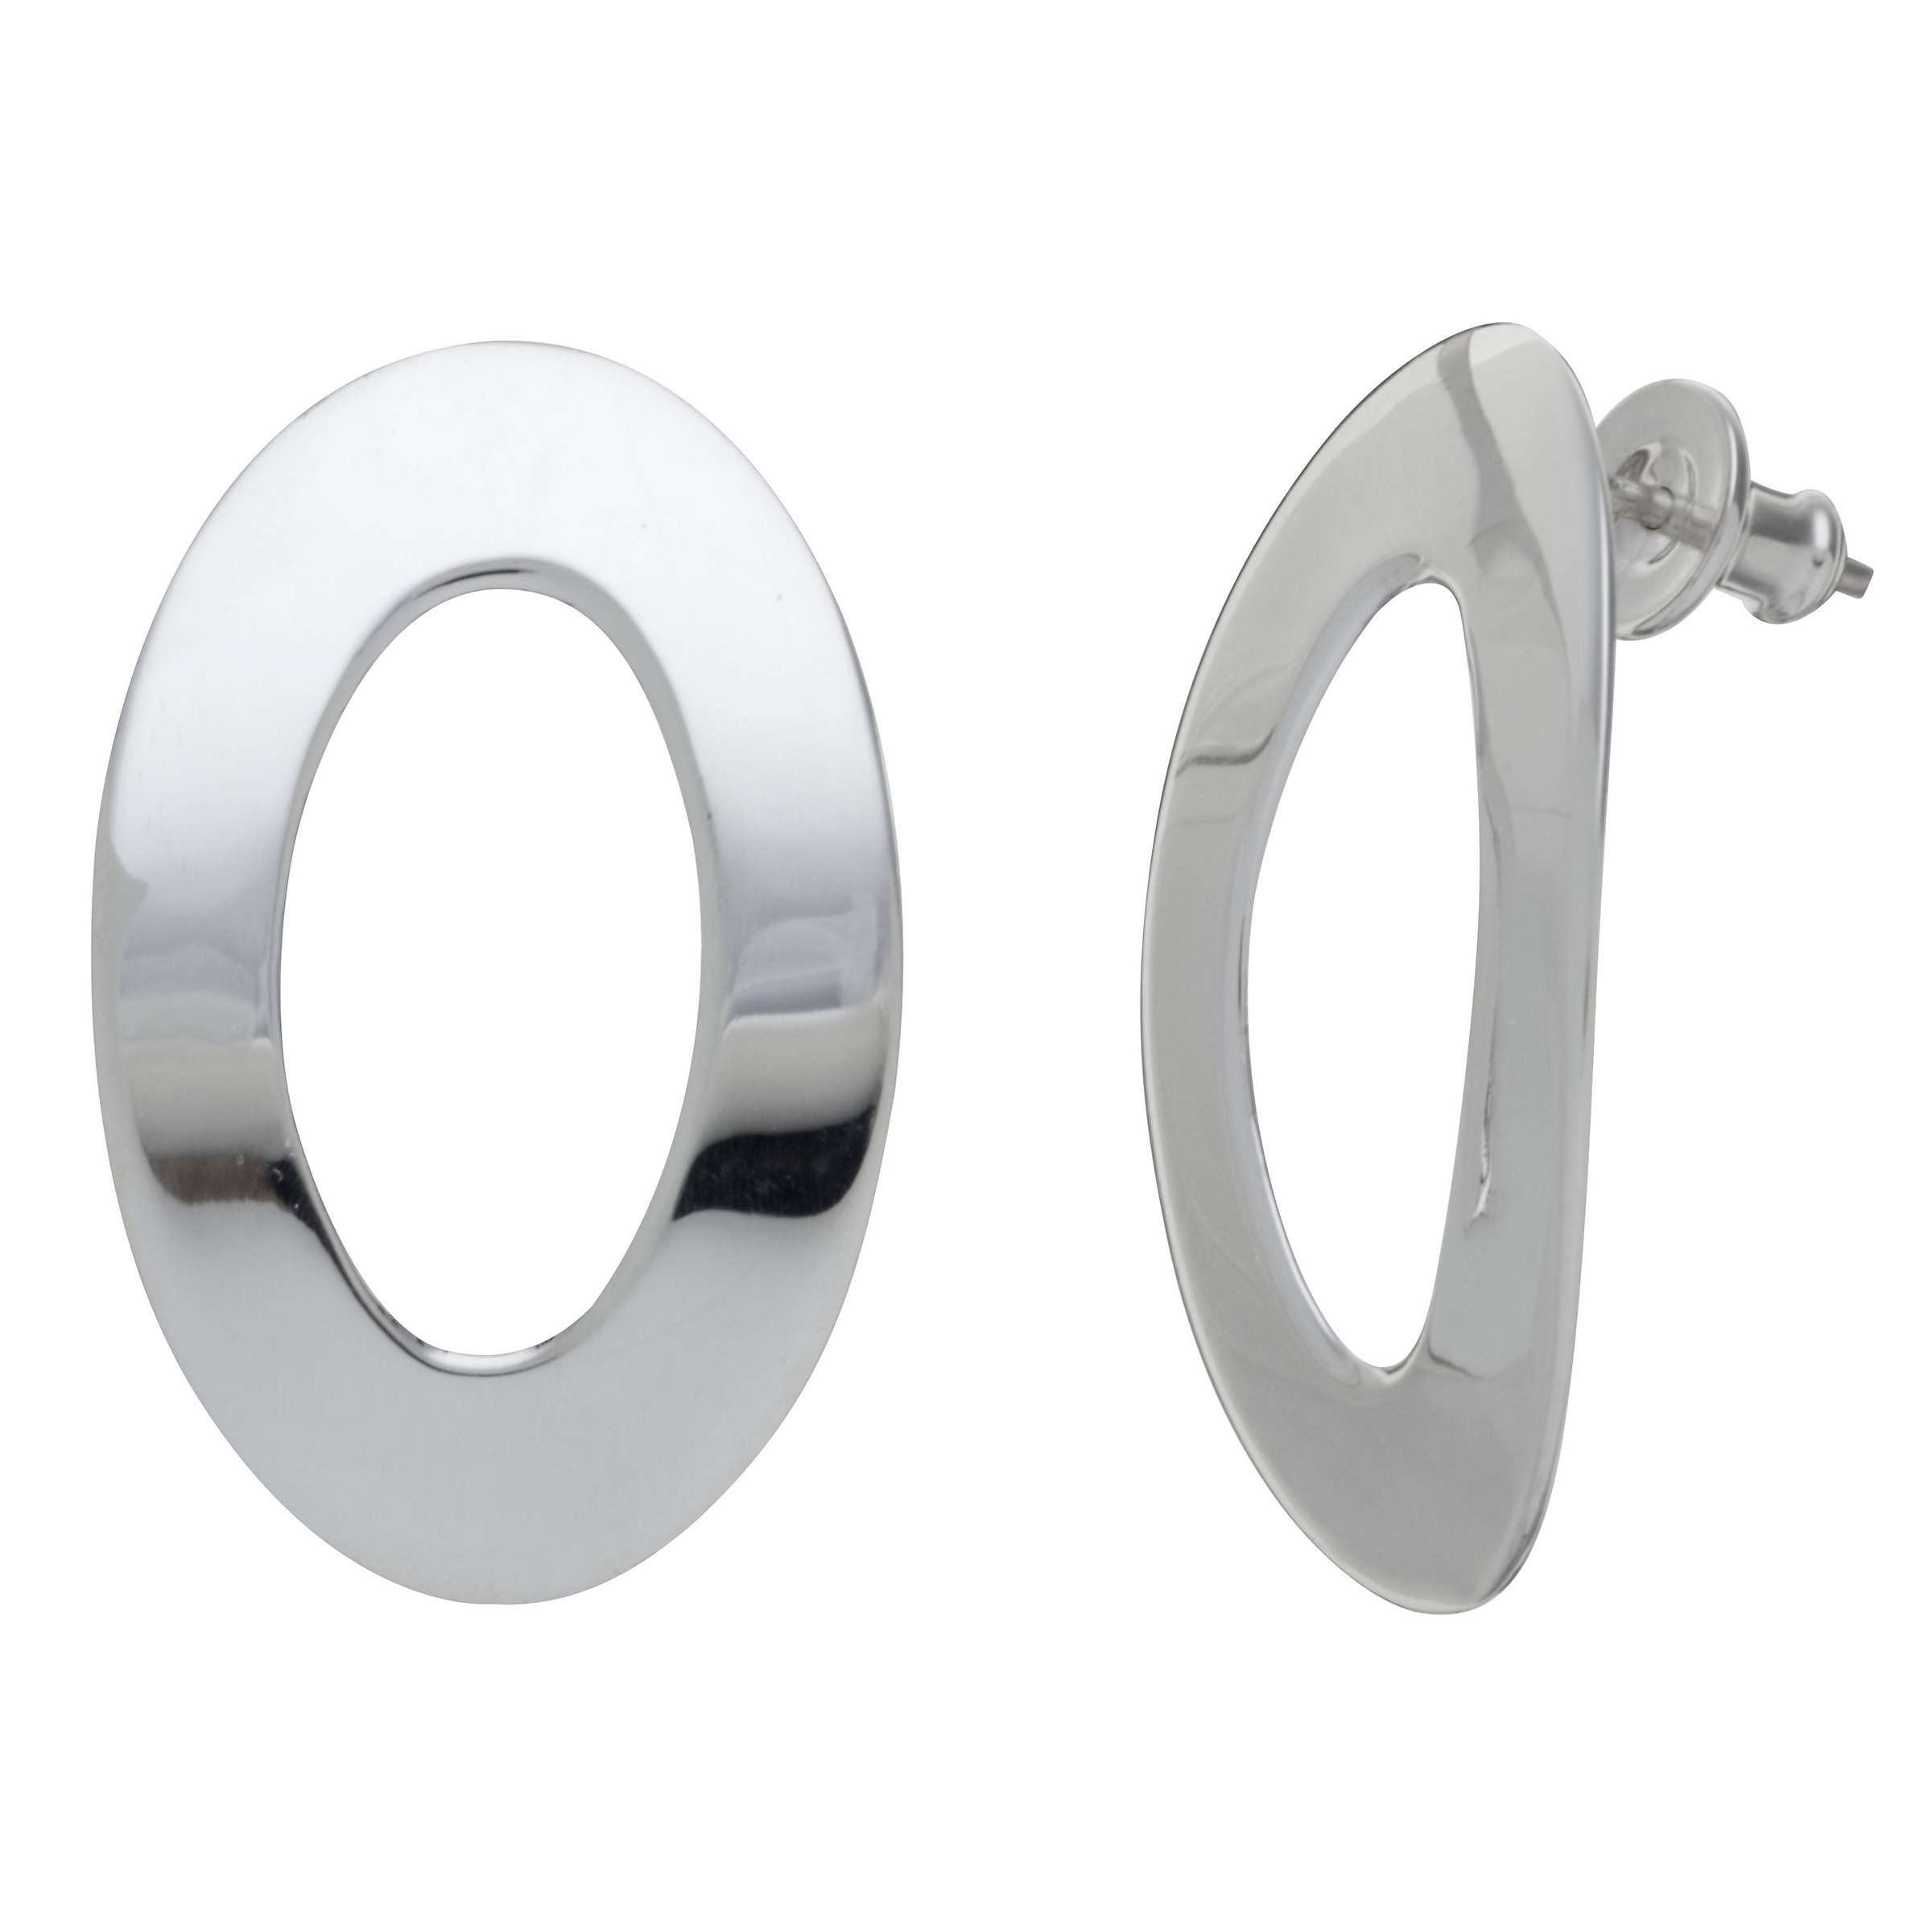 Buy Andea Sterling Silver Outline Oval Stud Earrings, Silver Online at johnlewis.com